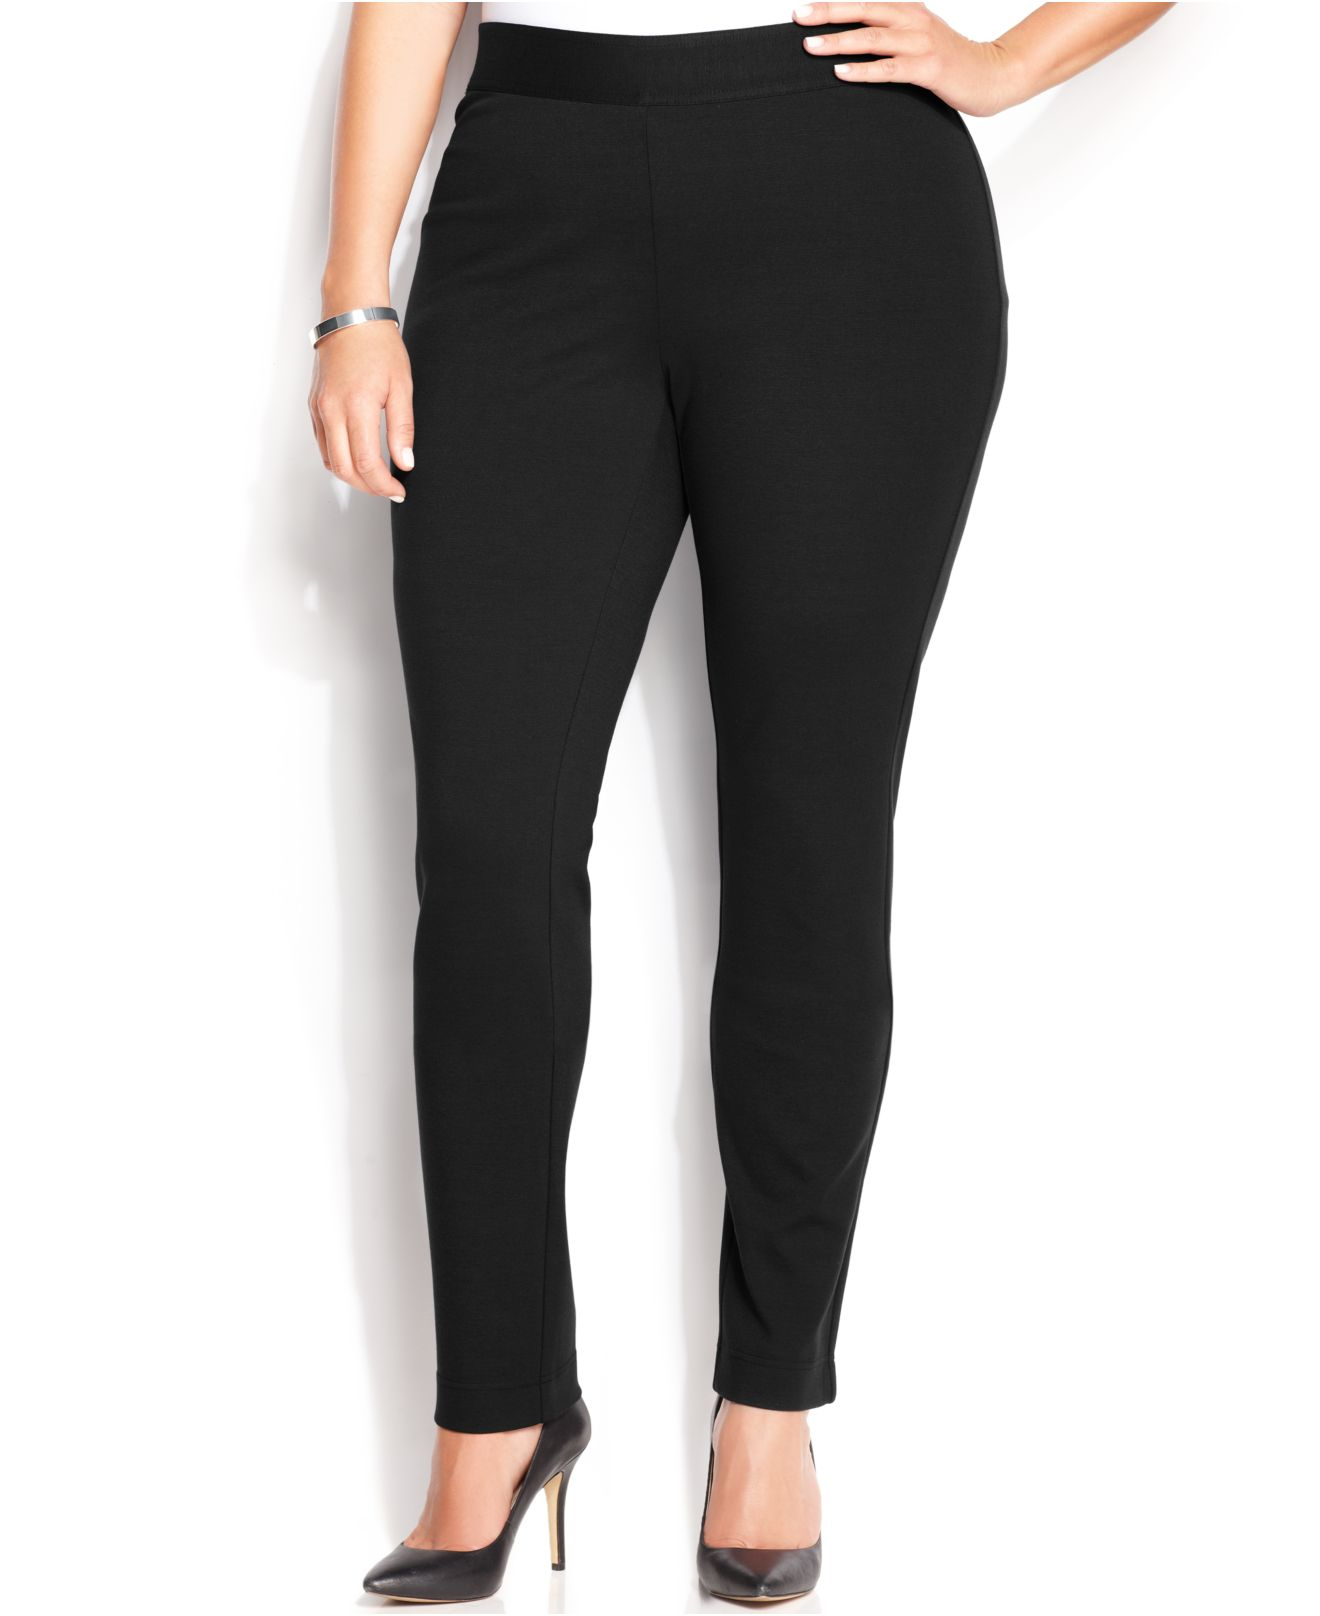 Inc international concepts Plus Size Pull-on Skinny Ponte Pants in ...